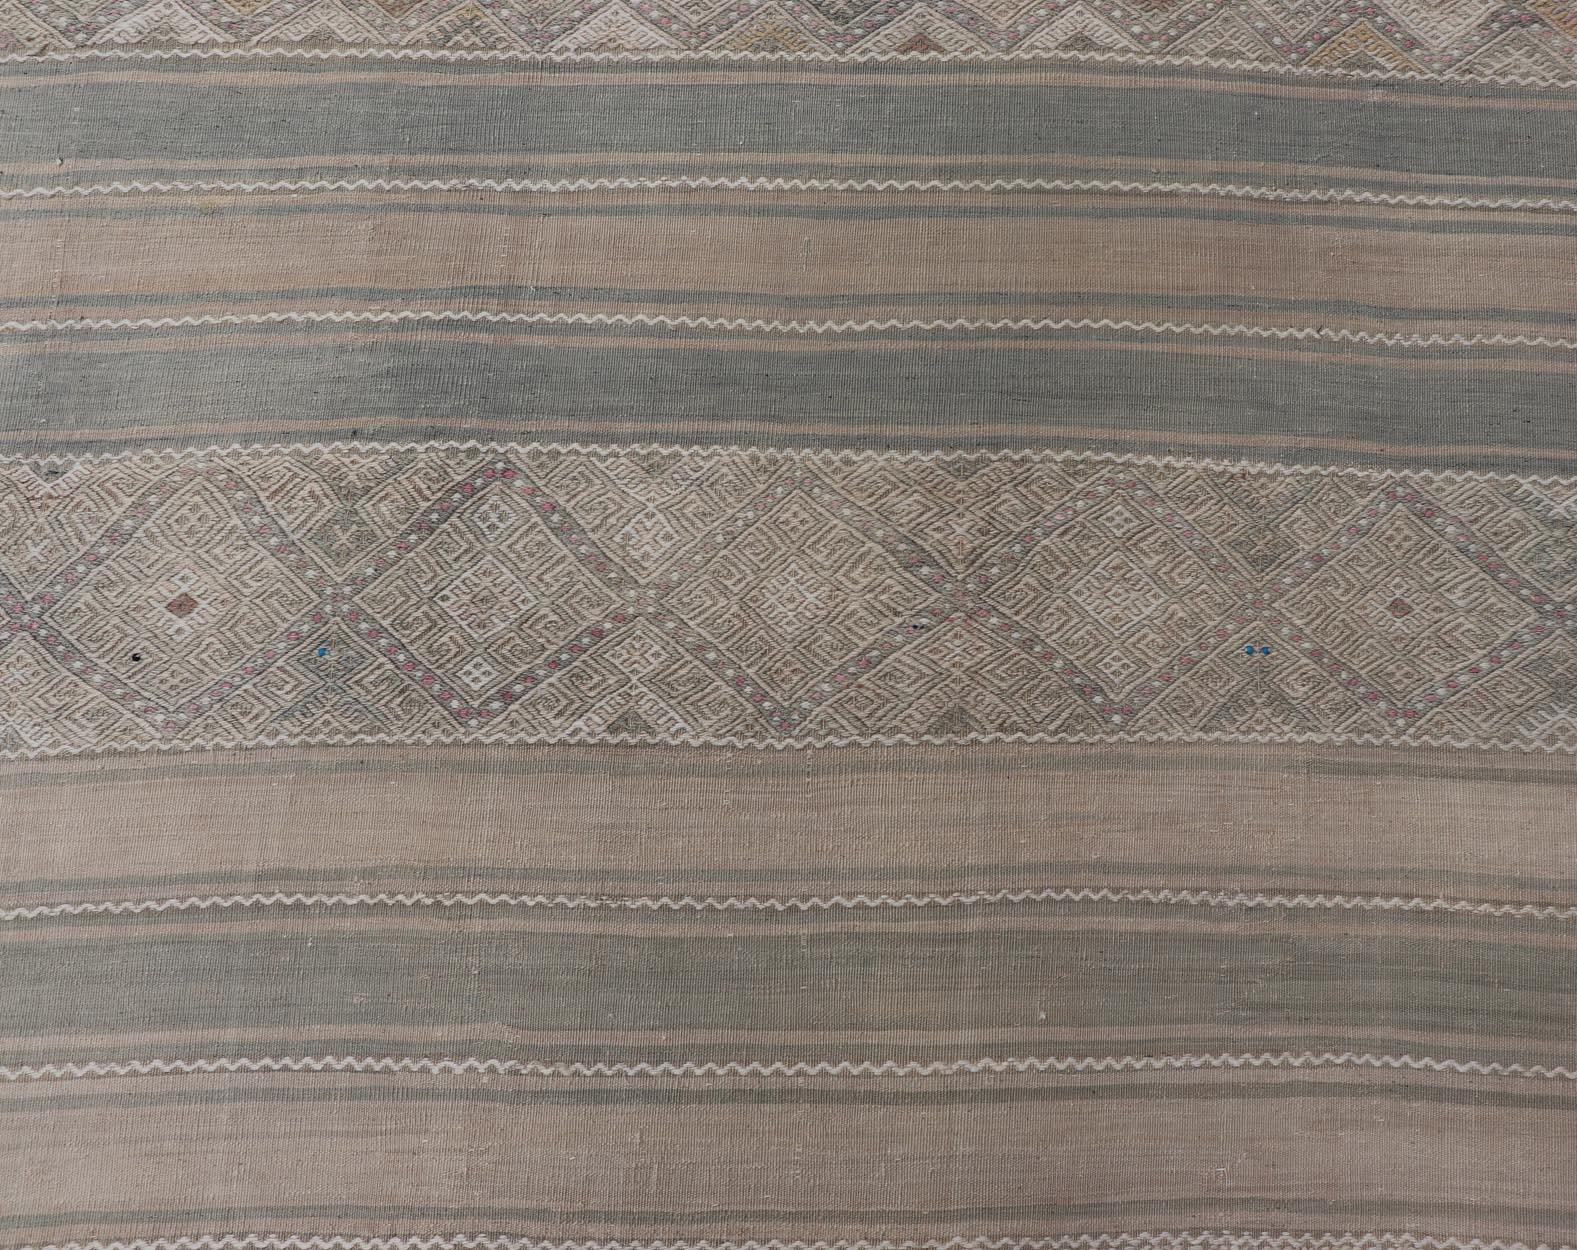 Gallery Vintage Turkish Flat-Weave Kilim with Embroideries in Earthy Tones 2